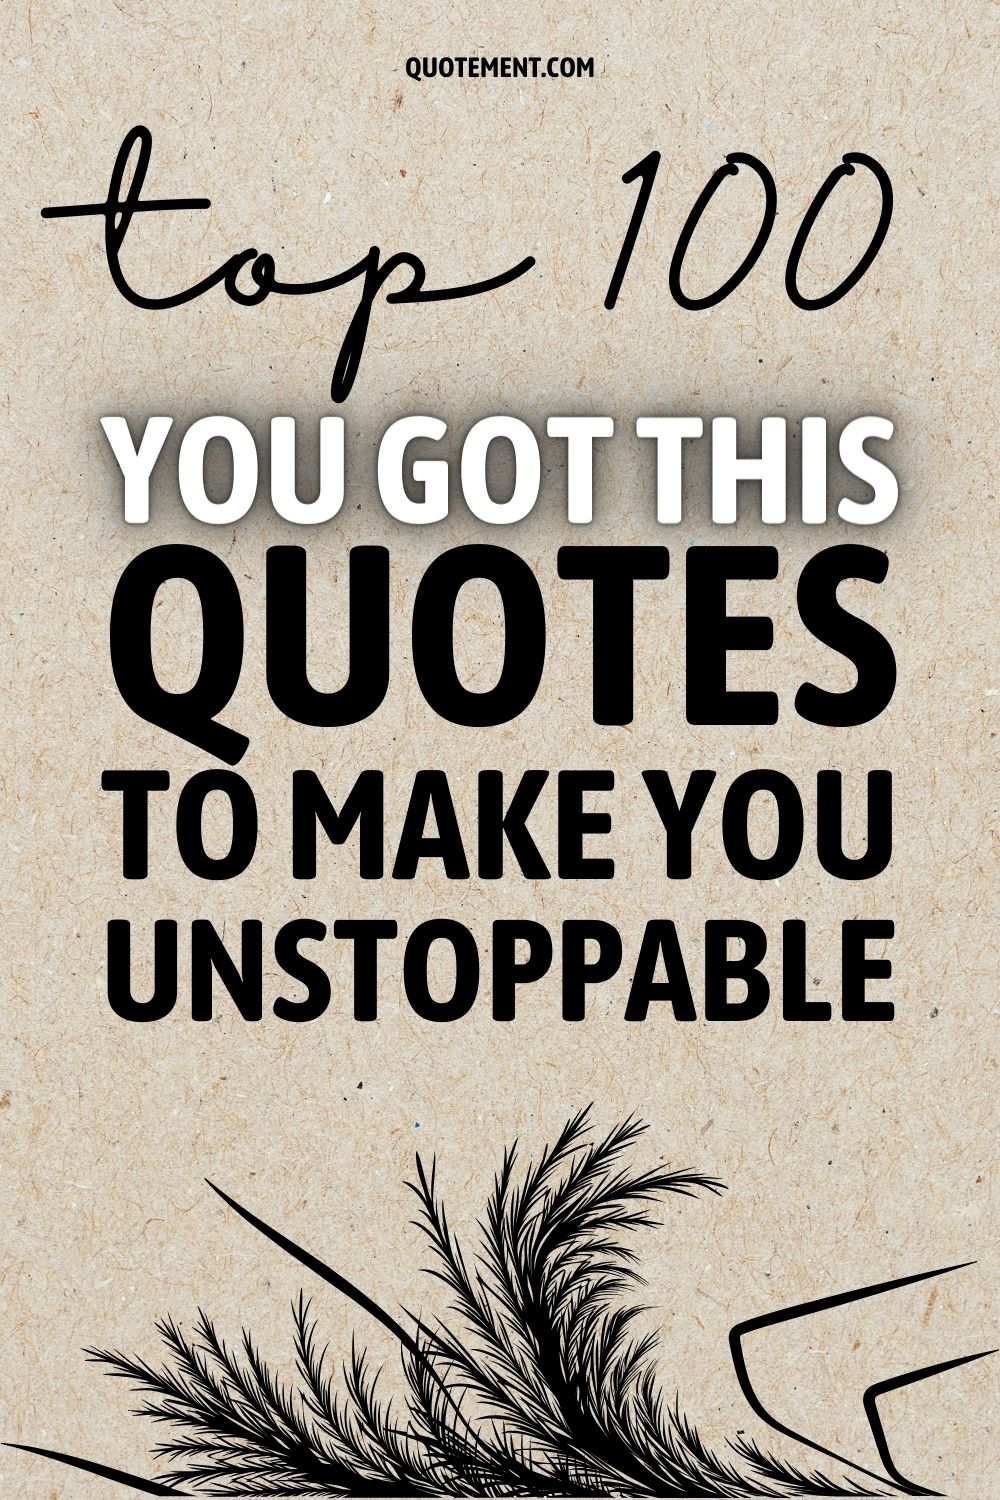 Top 100 You Got This Quotes To Make You Unstoppable
